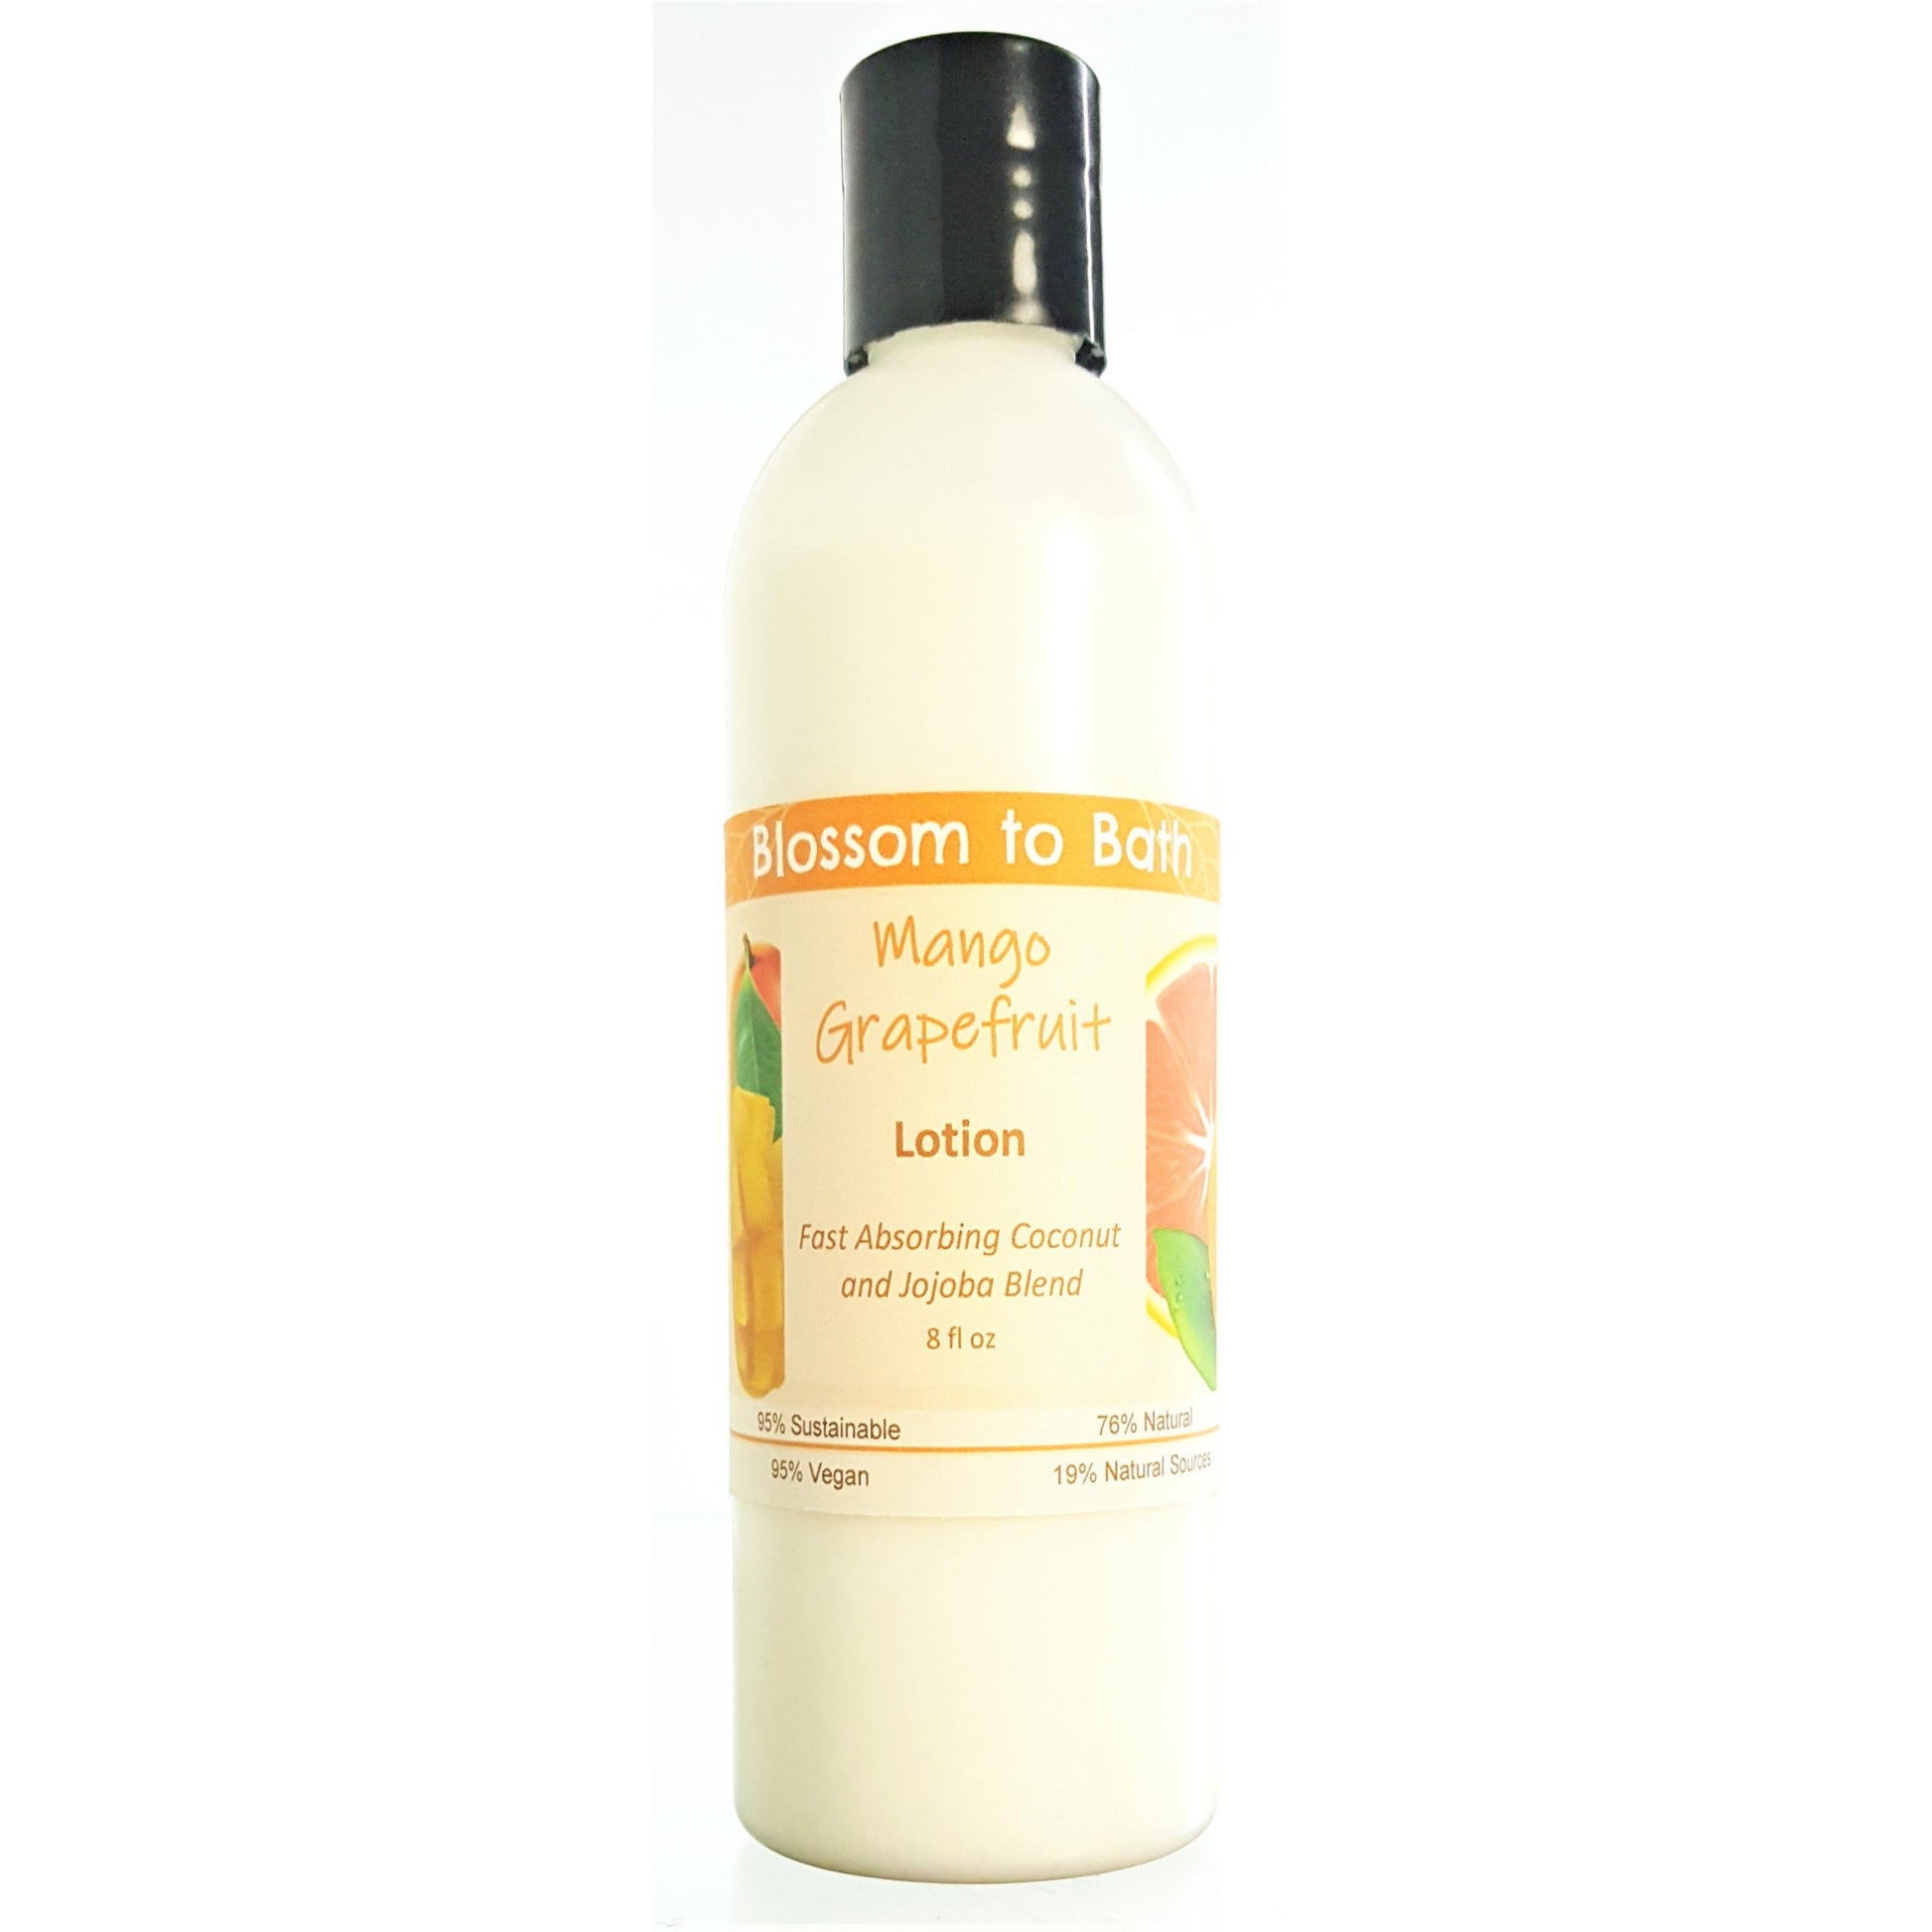 Buy Blossom to Bath Mango Grapefruit Lotion from Flowersong Soap Studio.  Daily moisture luxury that soaks in quickly made with organic oils and butters that soften and smooth the skin  Exotic tropical fruits in a powdery puff of sophisticated freshness.